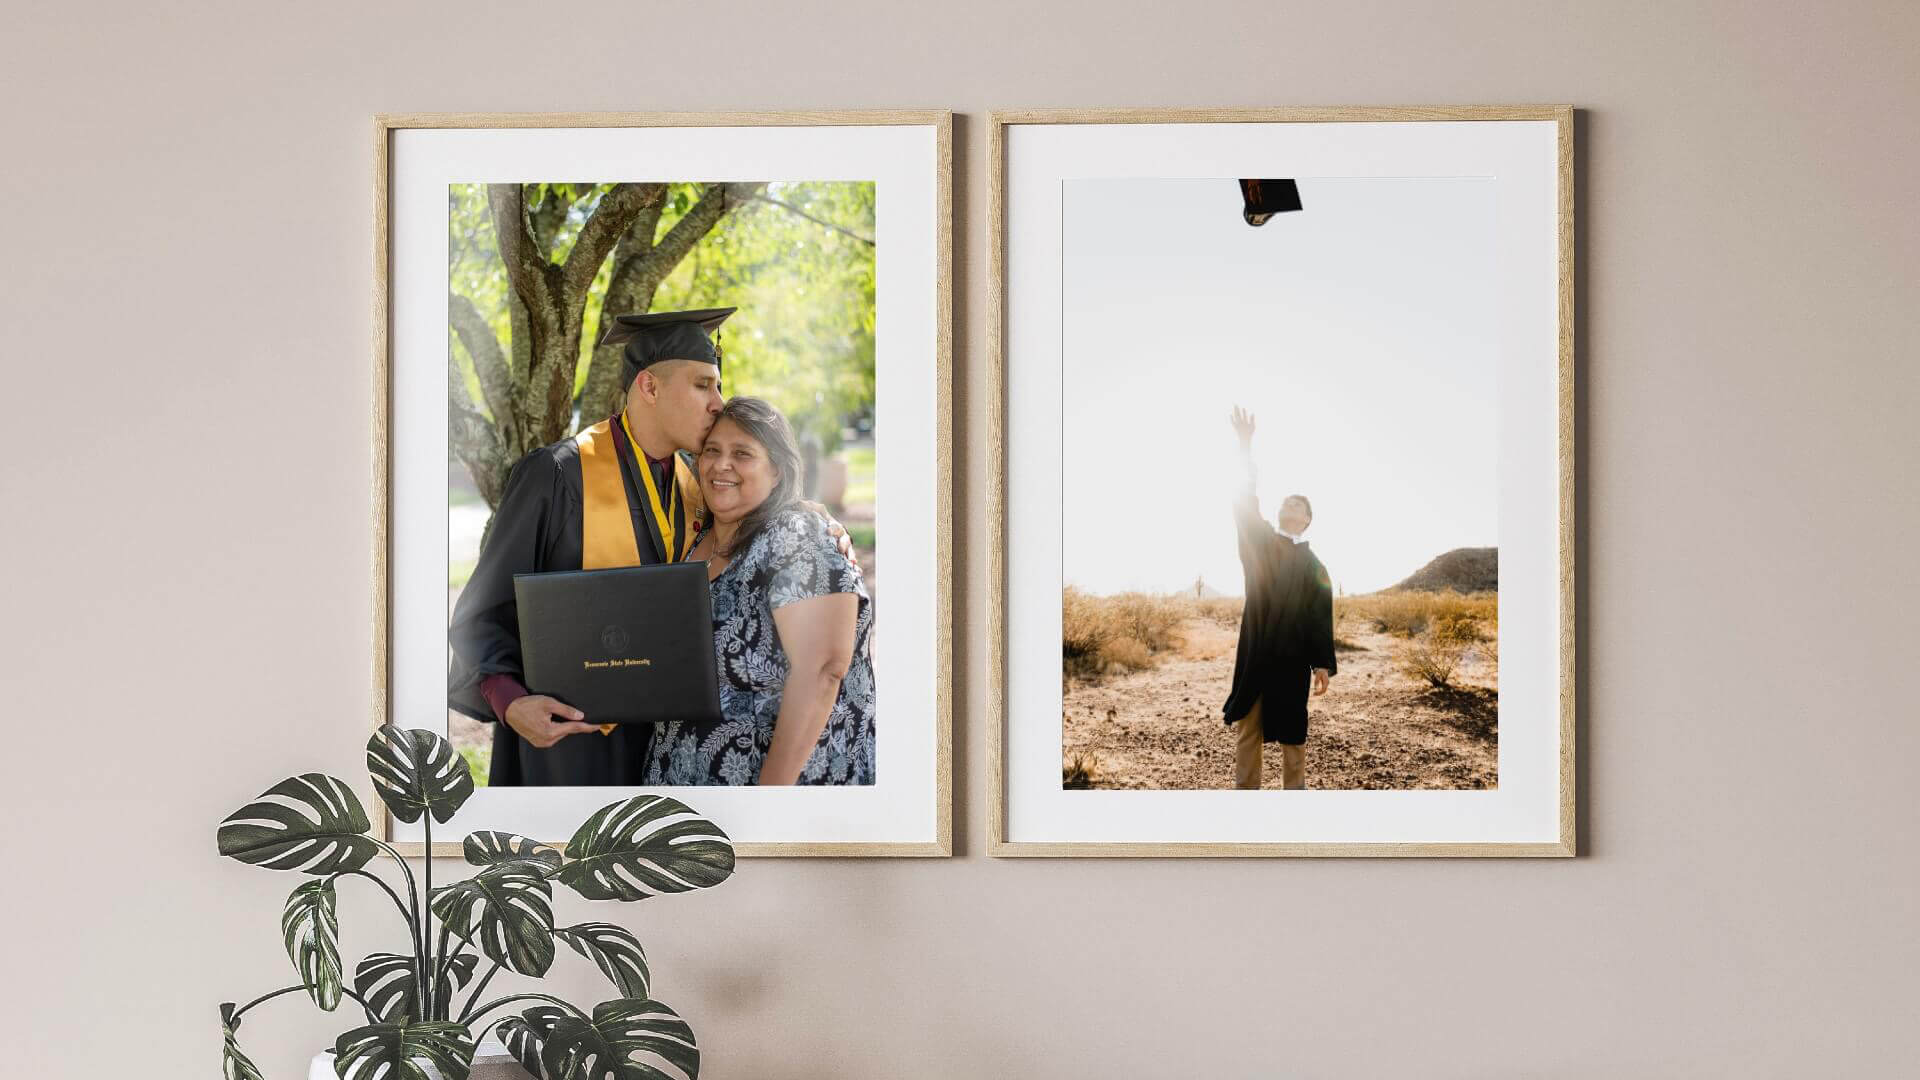 Meaningful Gifts to Congratulate the Graduate